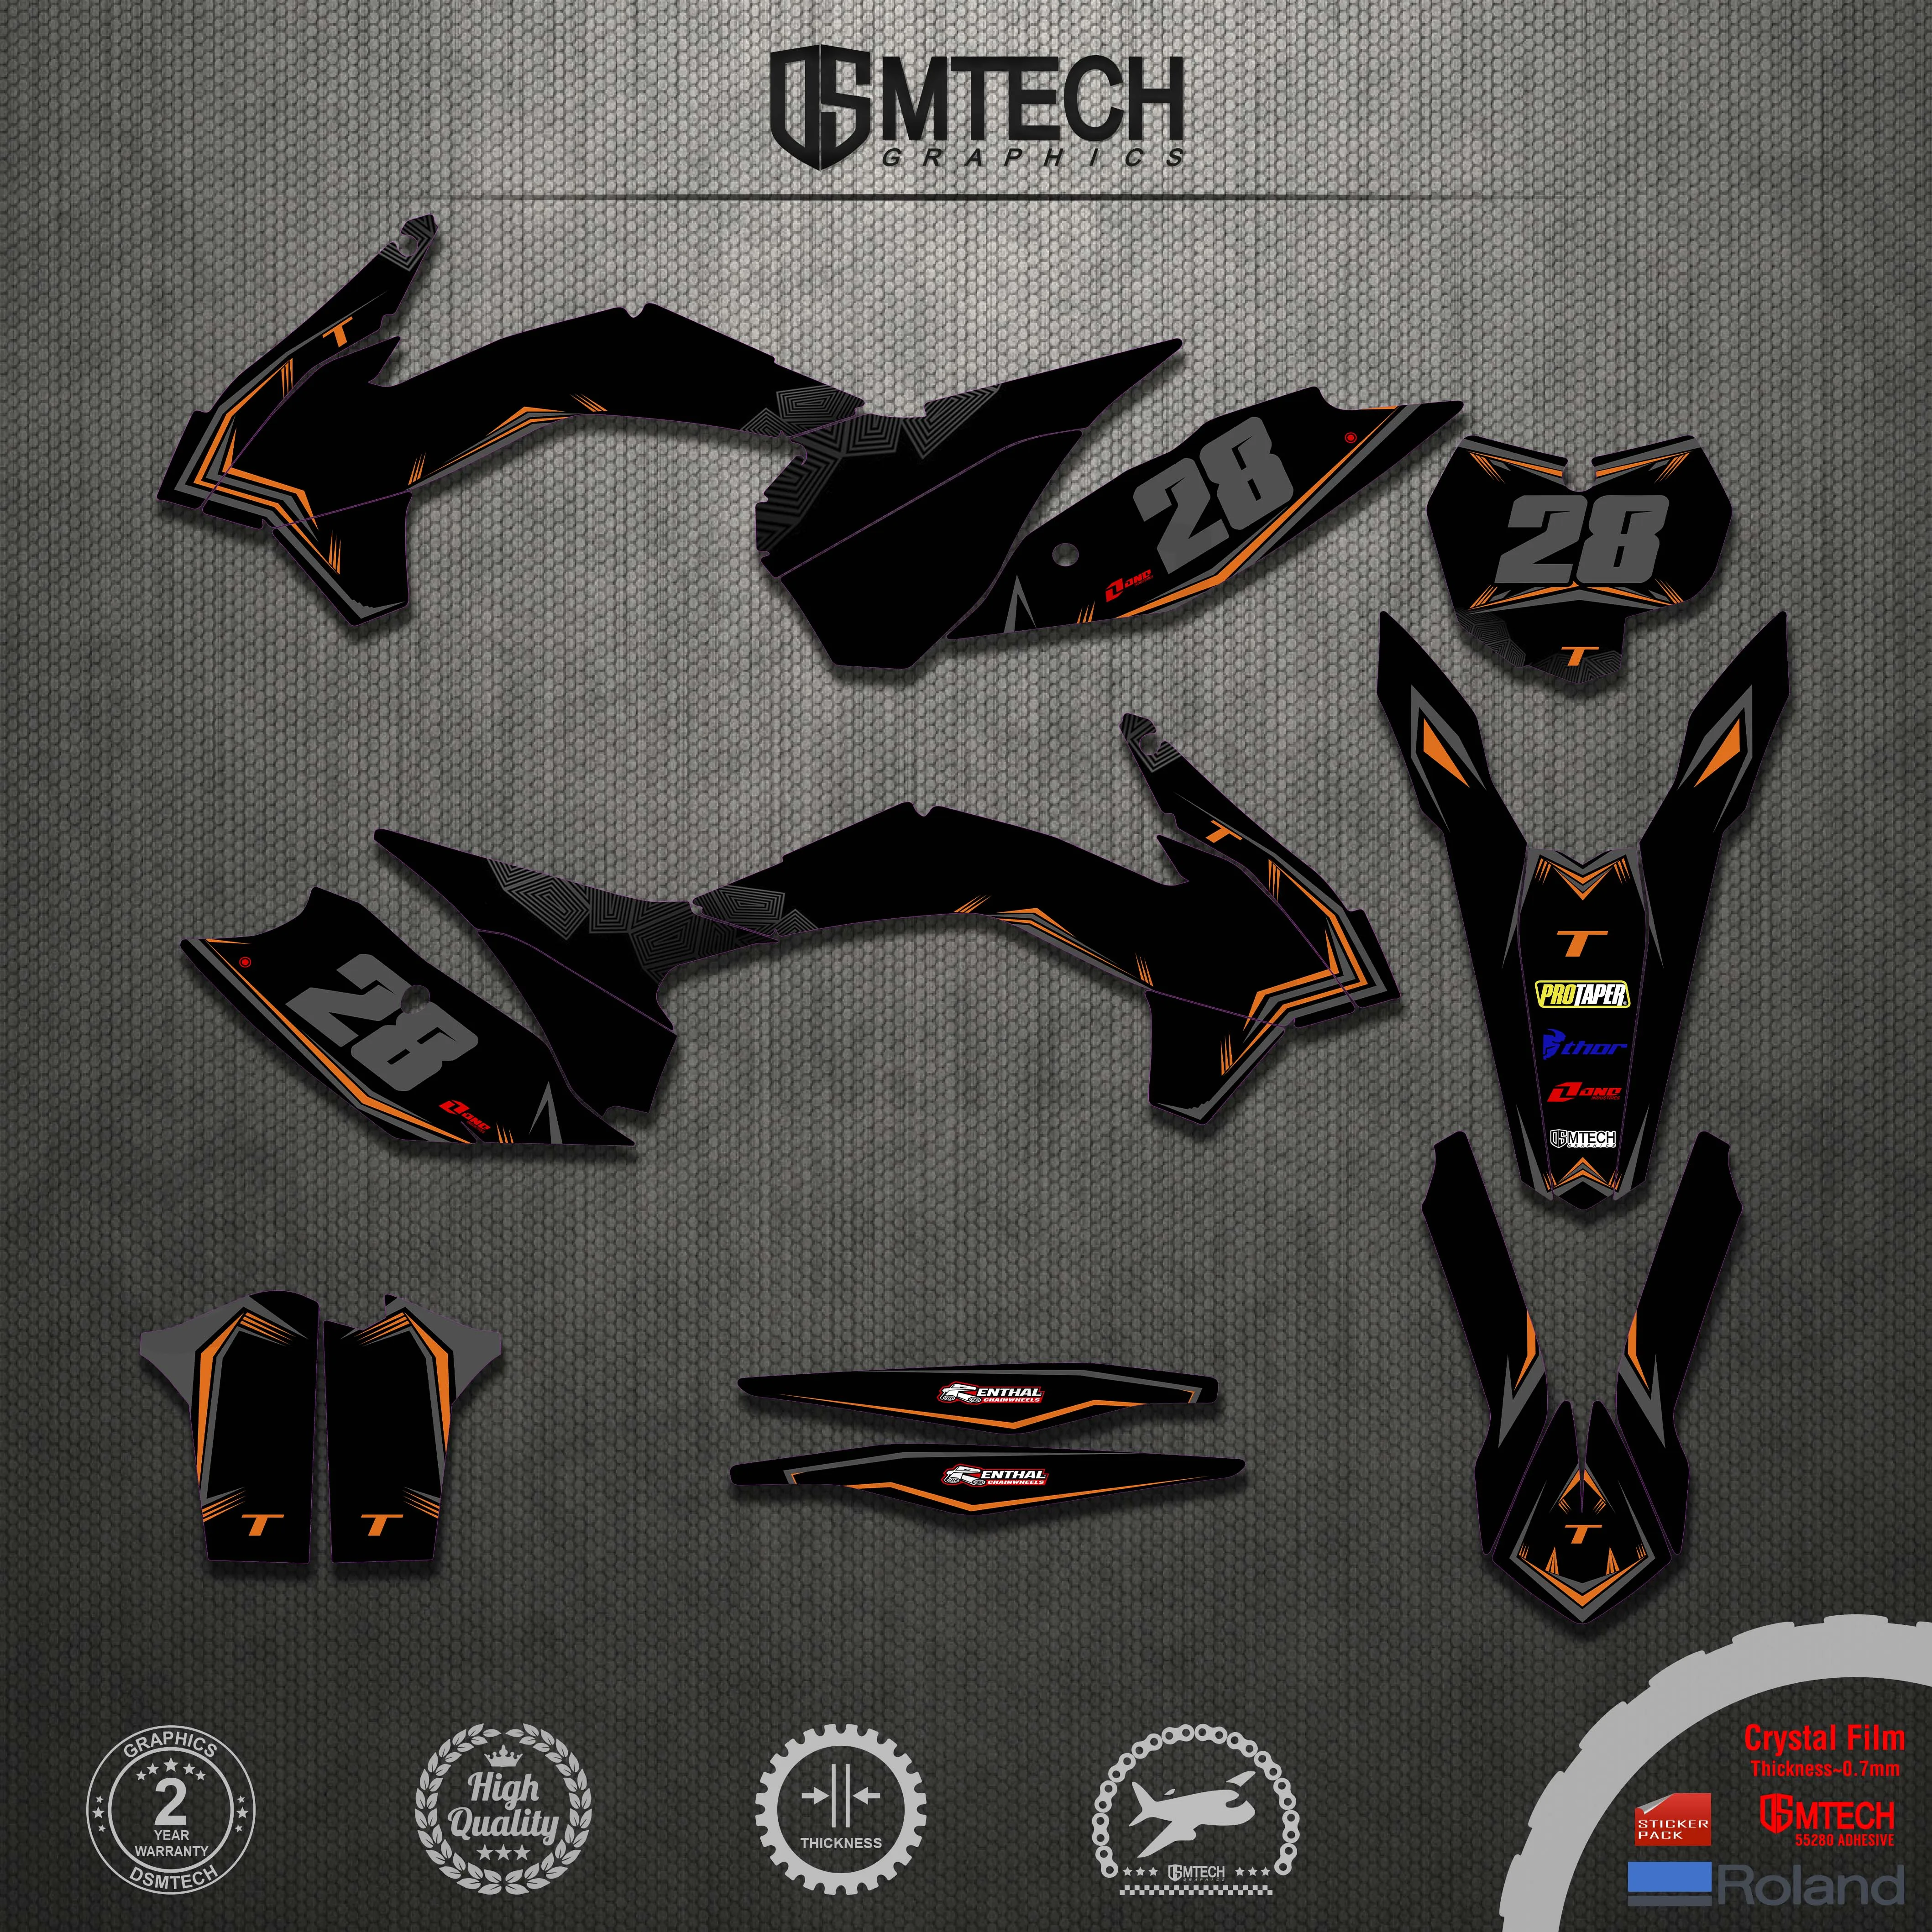 DSMTECH Custom Team Graphics Decal Sticker Kit Combo for KTM 2013 2014 2015 SX SXF , 2014 2015 2016 EXC XC-W EXC-F 004